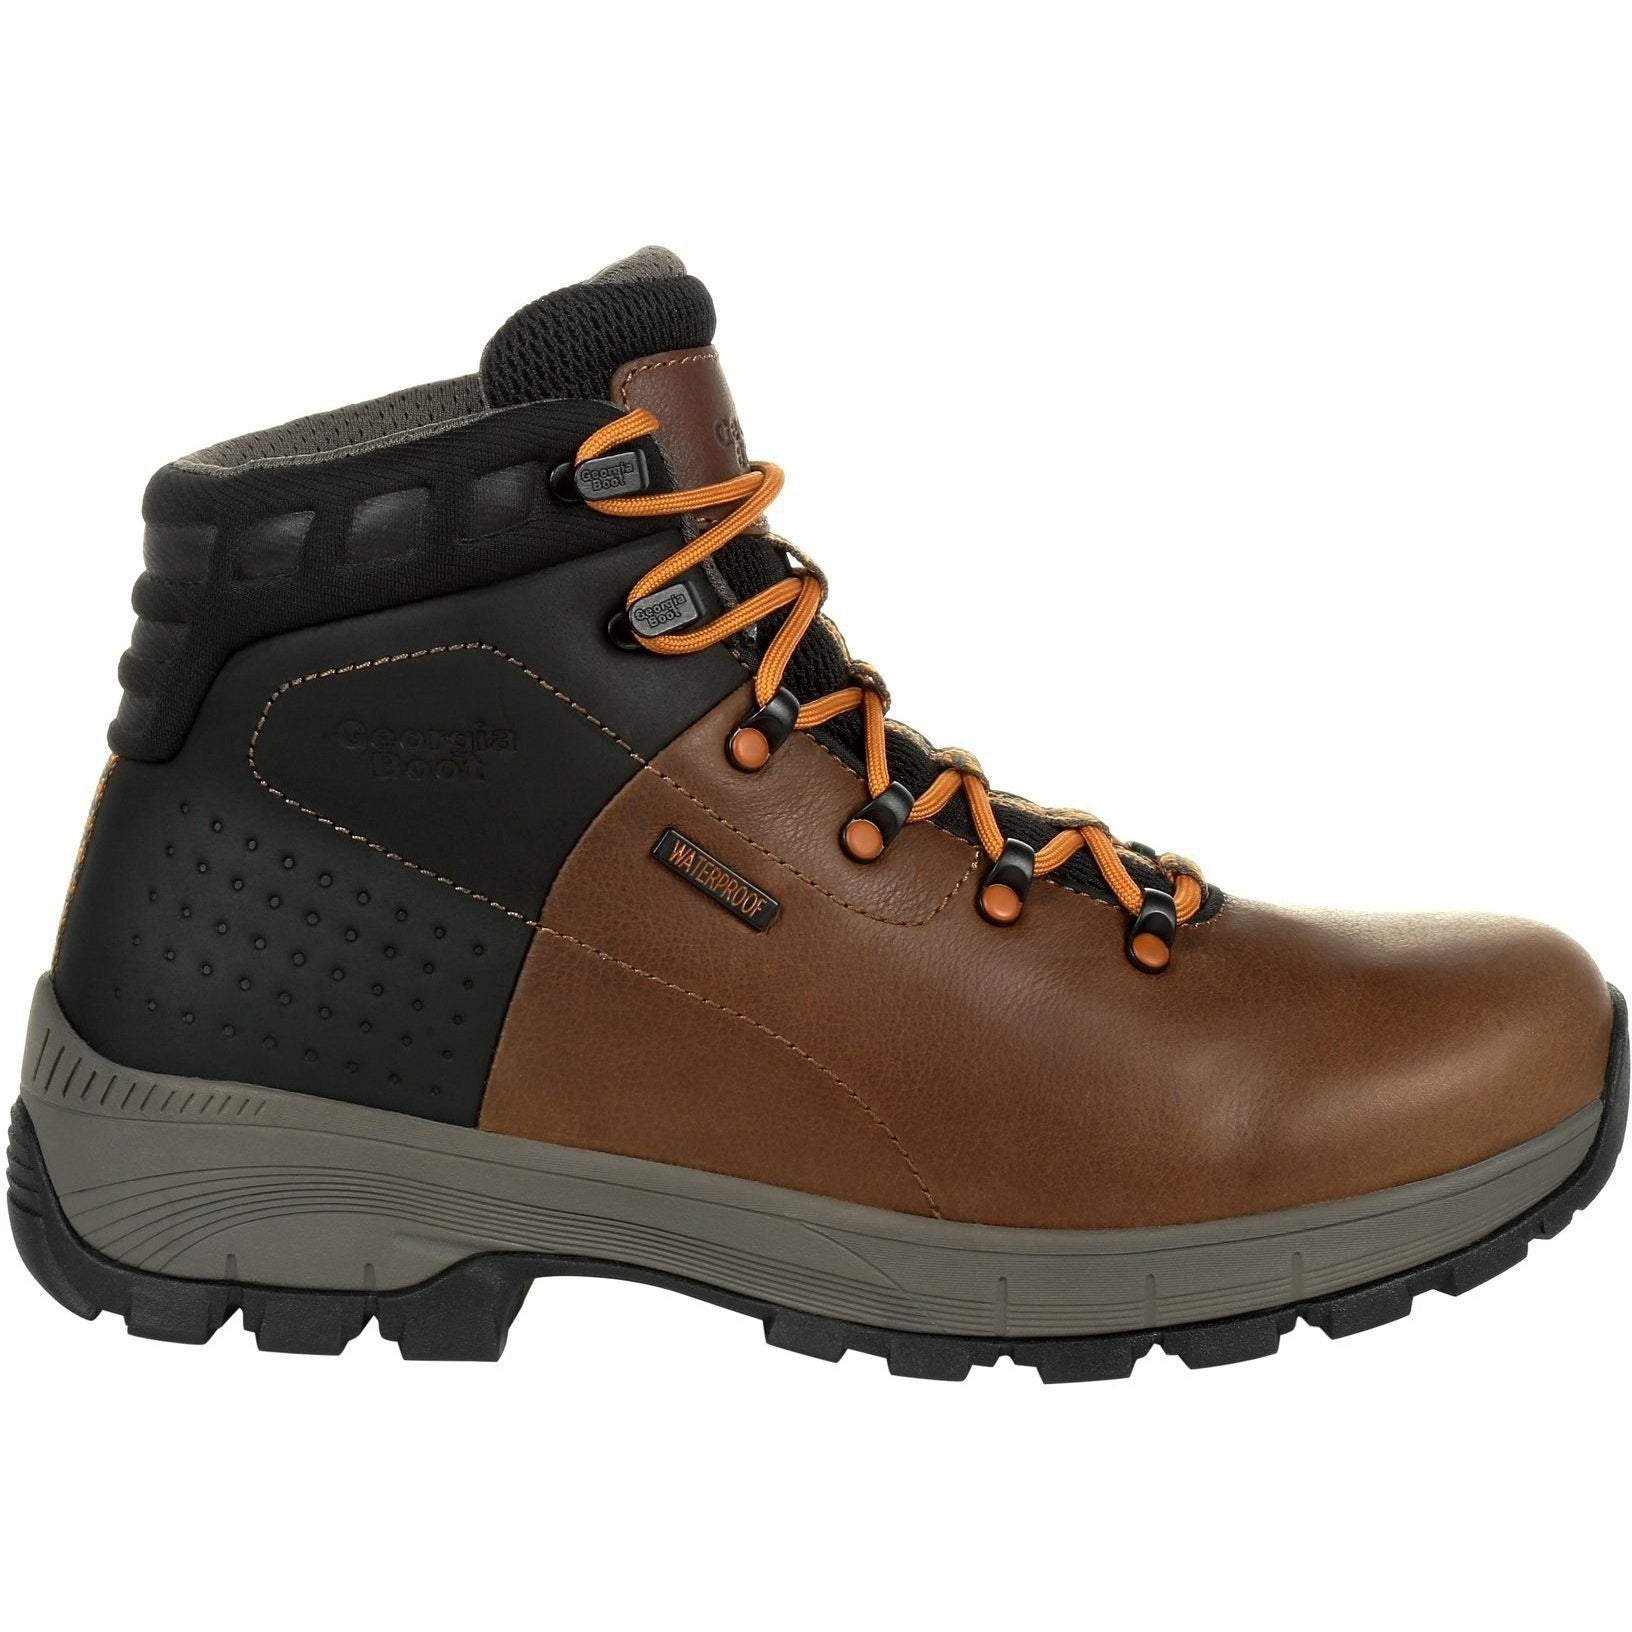 Georgia Men's Eagle Trail 6" Soft toe WP Hiker Work Boot - Brown - GB00402  - Overlook Boots